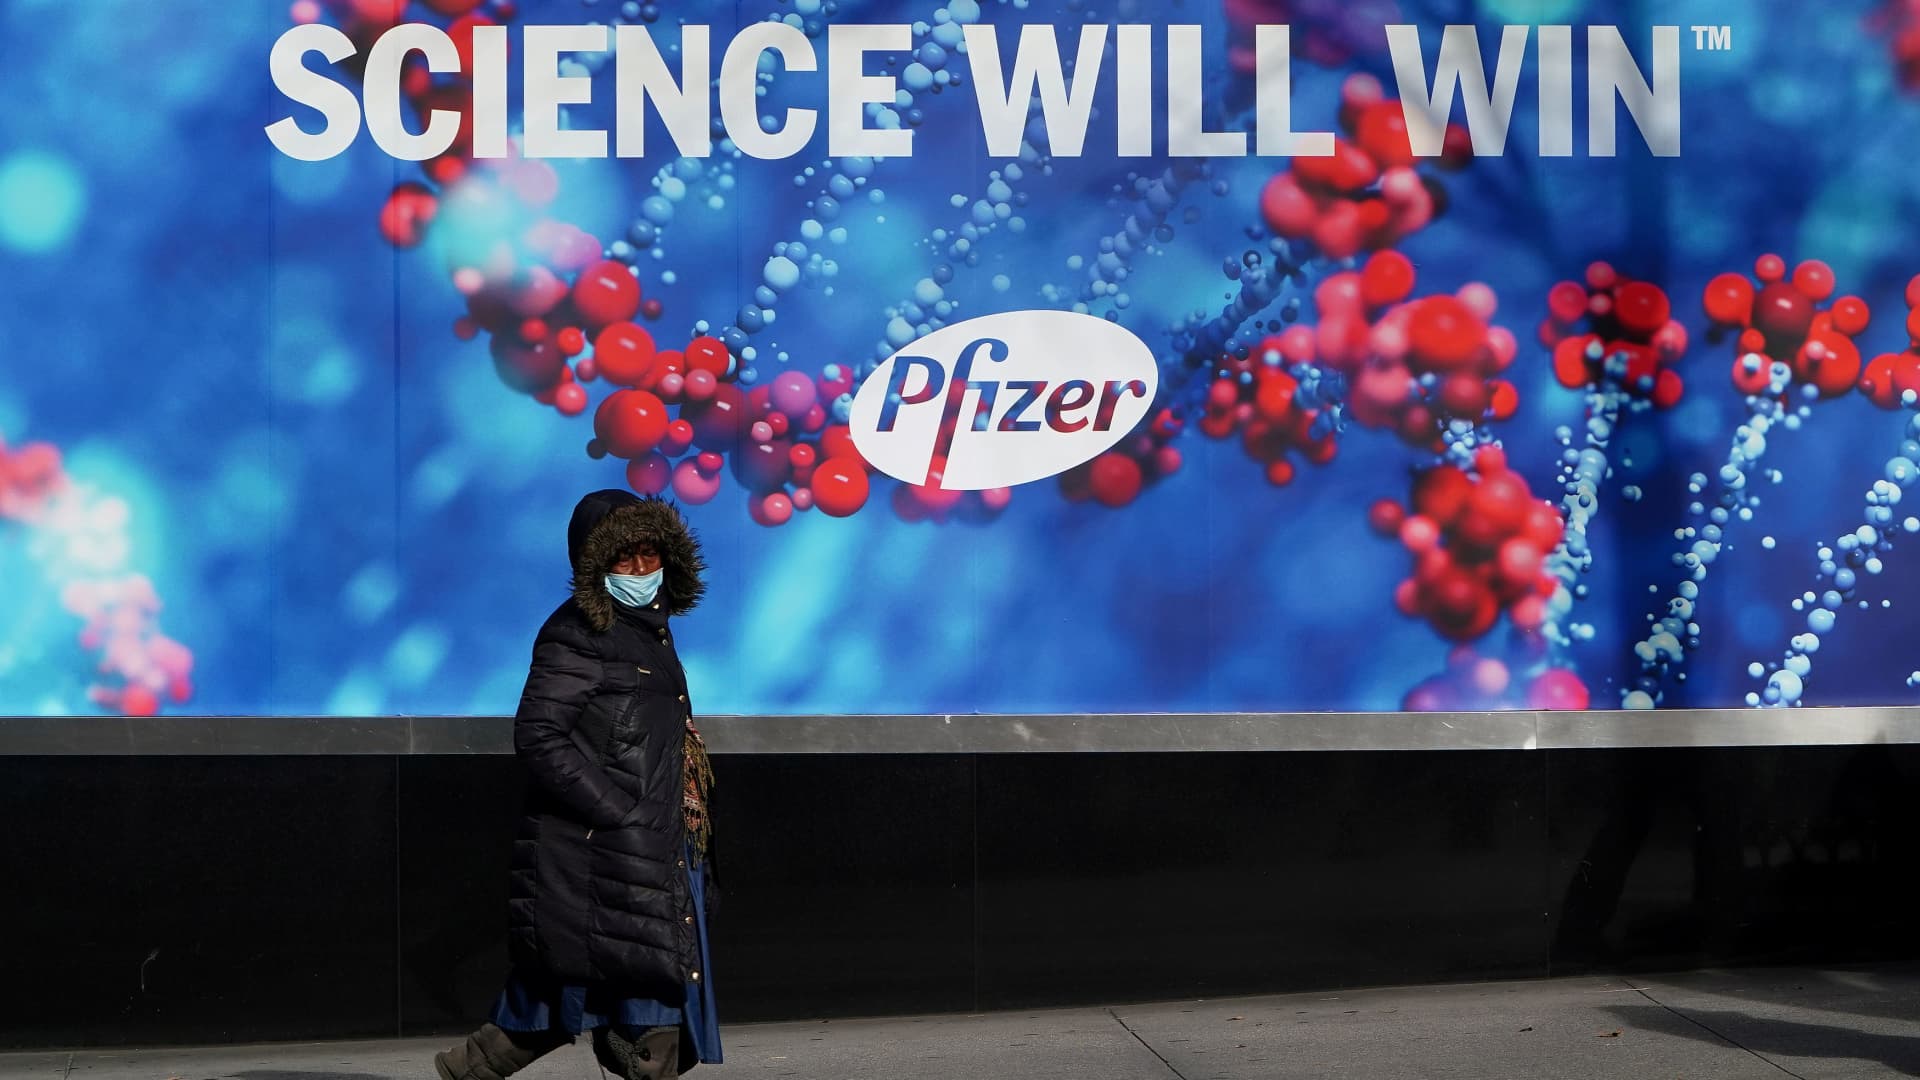 Goldman Sachs upgrades Pfizer, says pharma giant can outperform even as Covid demand diminishes